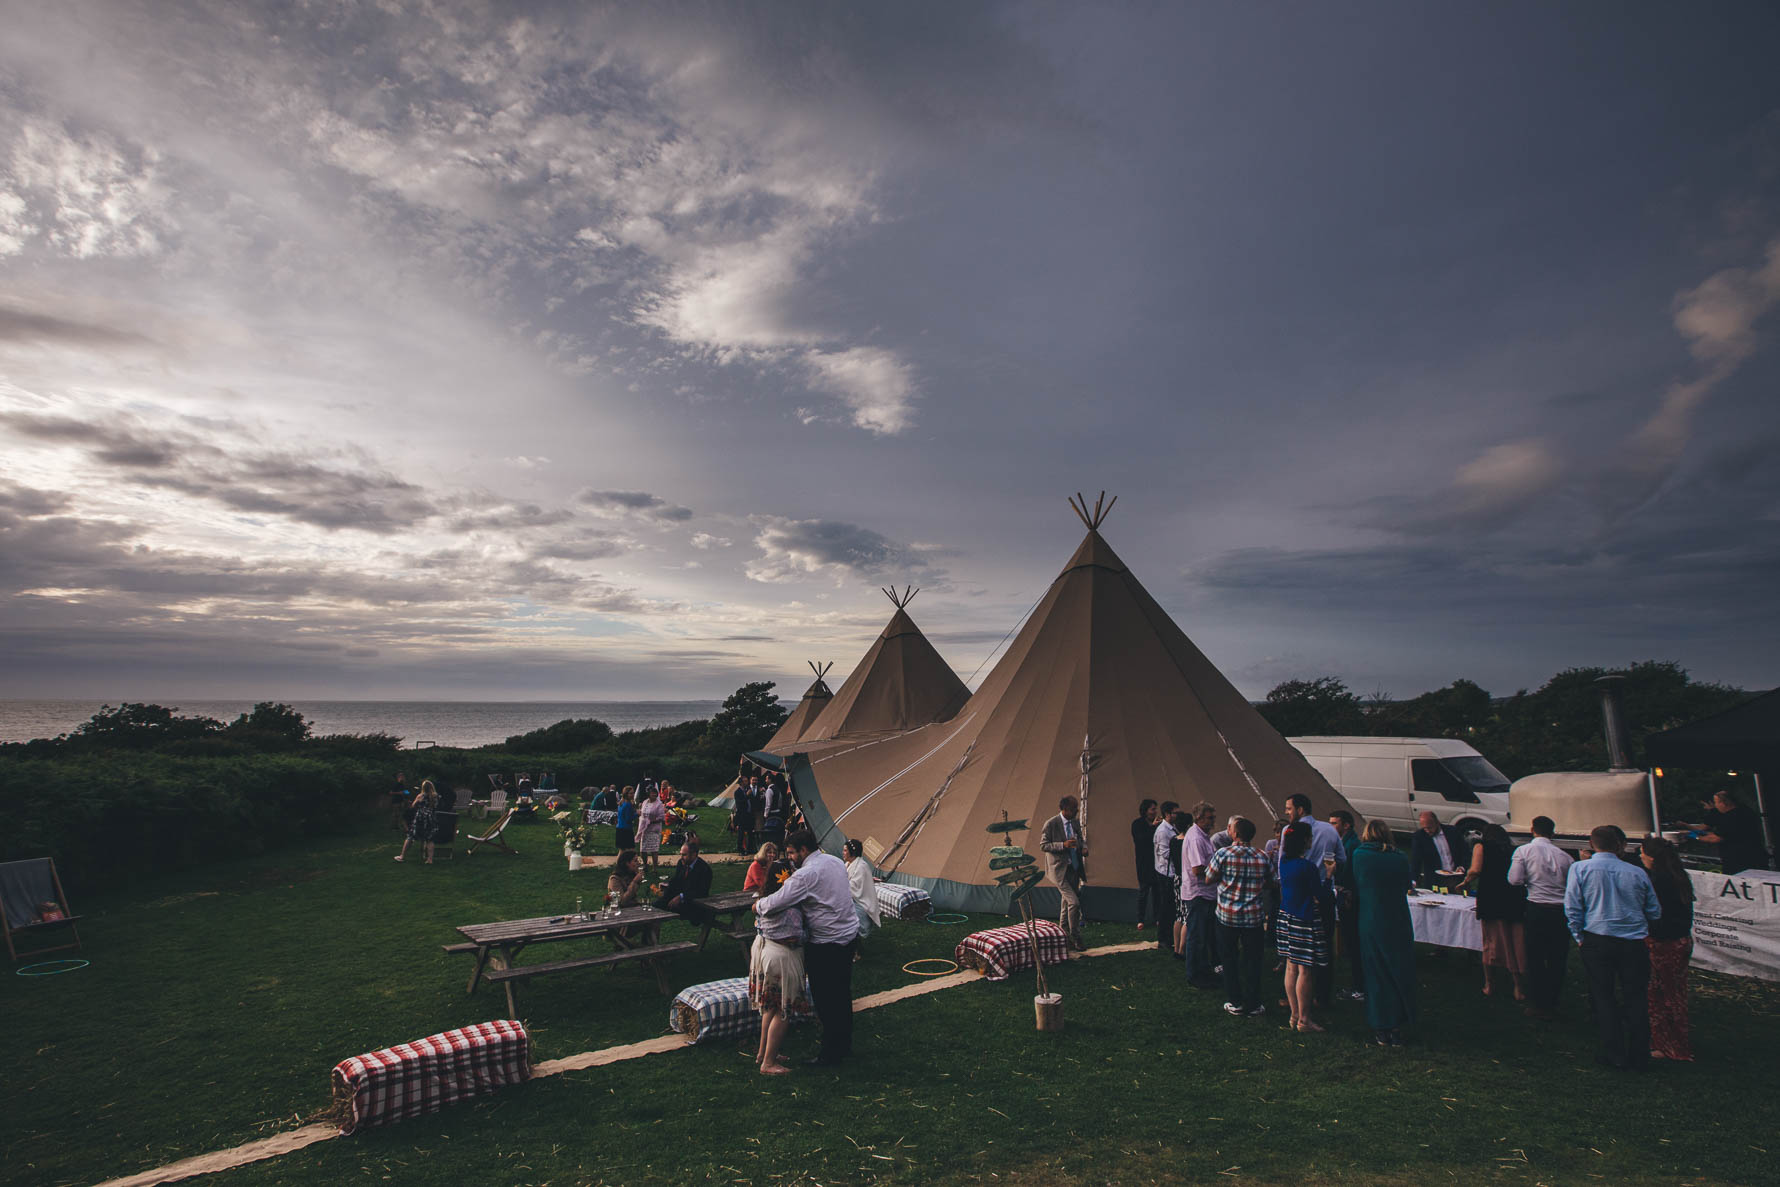 Shot of three large tipi's on a lawn with wedding guests in and around the tipi's as the sky is starting to cloud over in the early evening